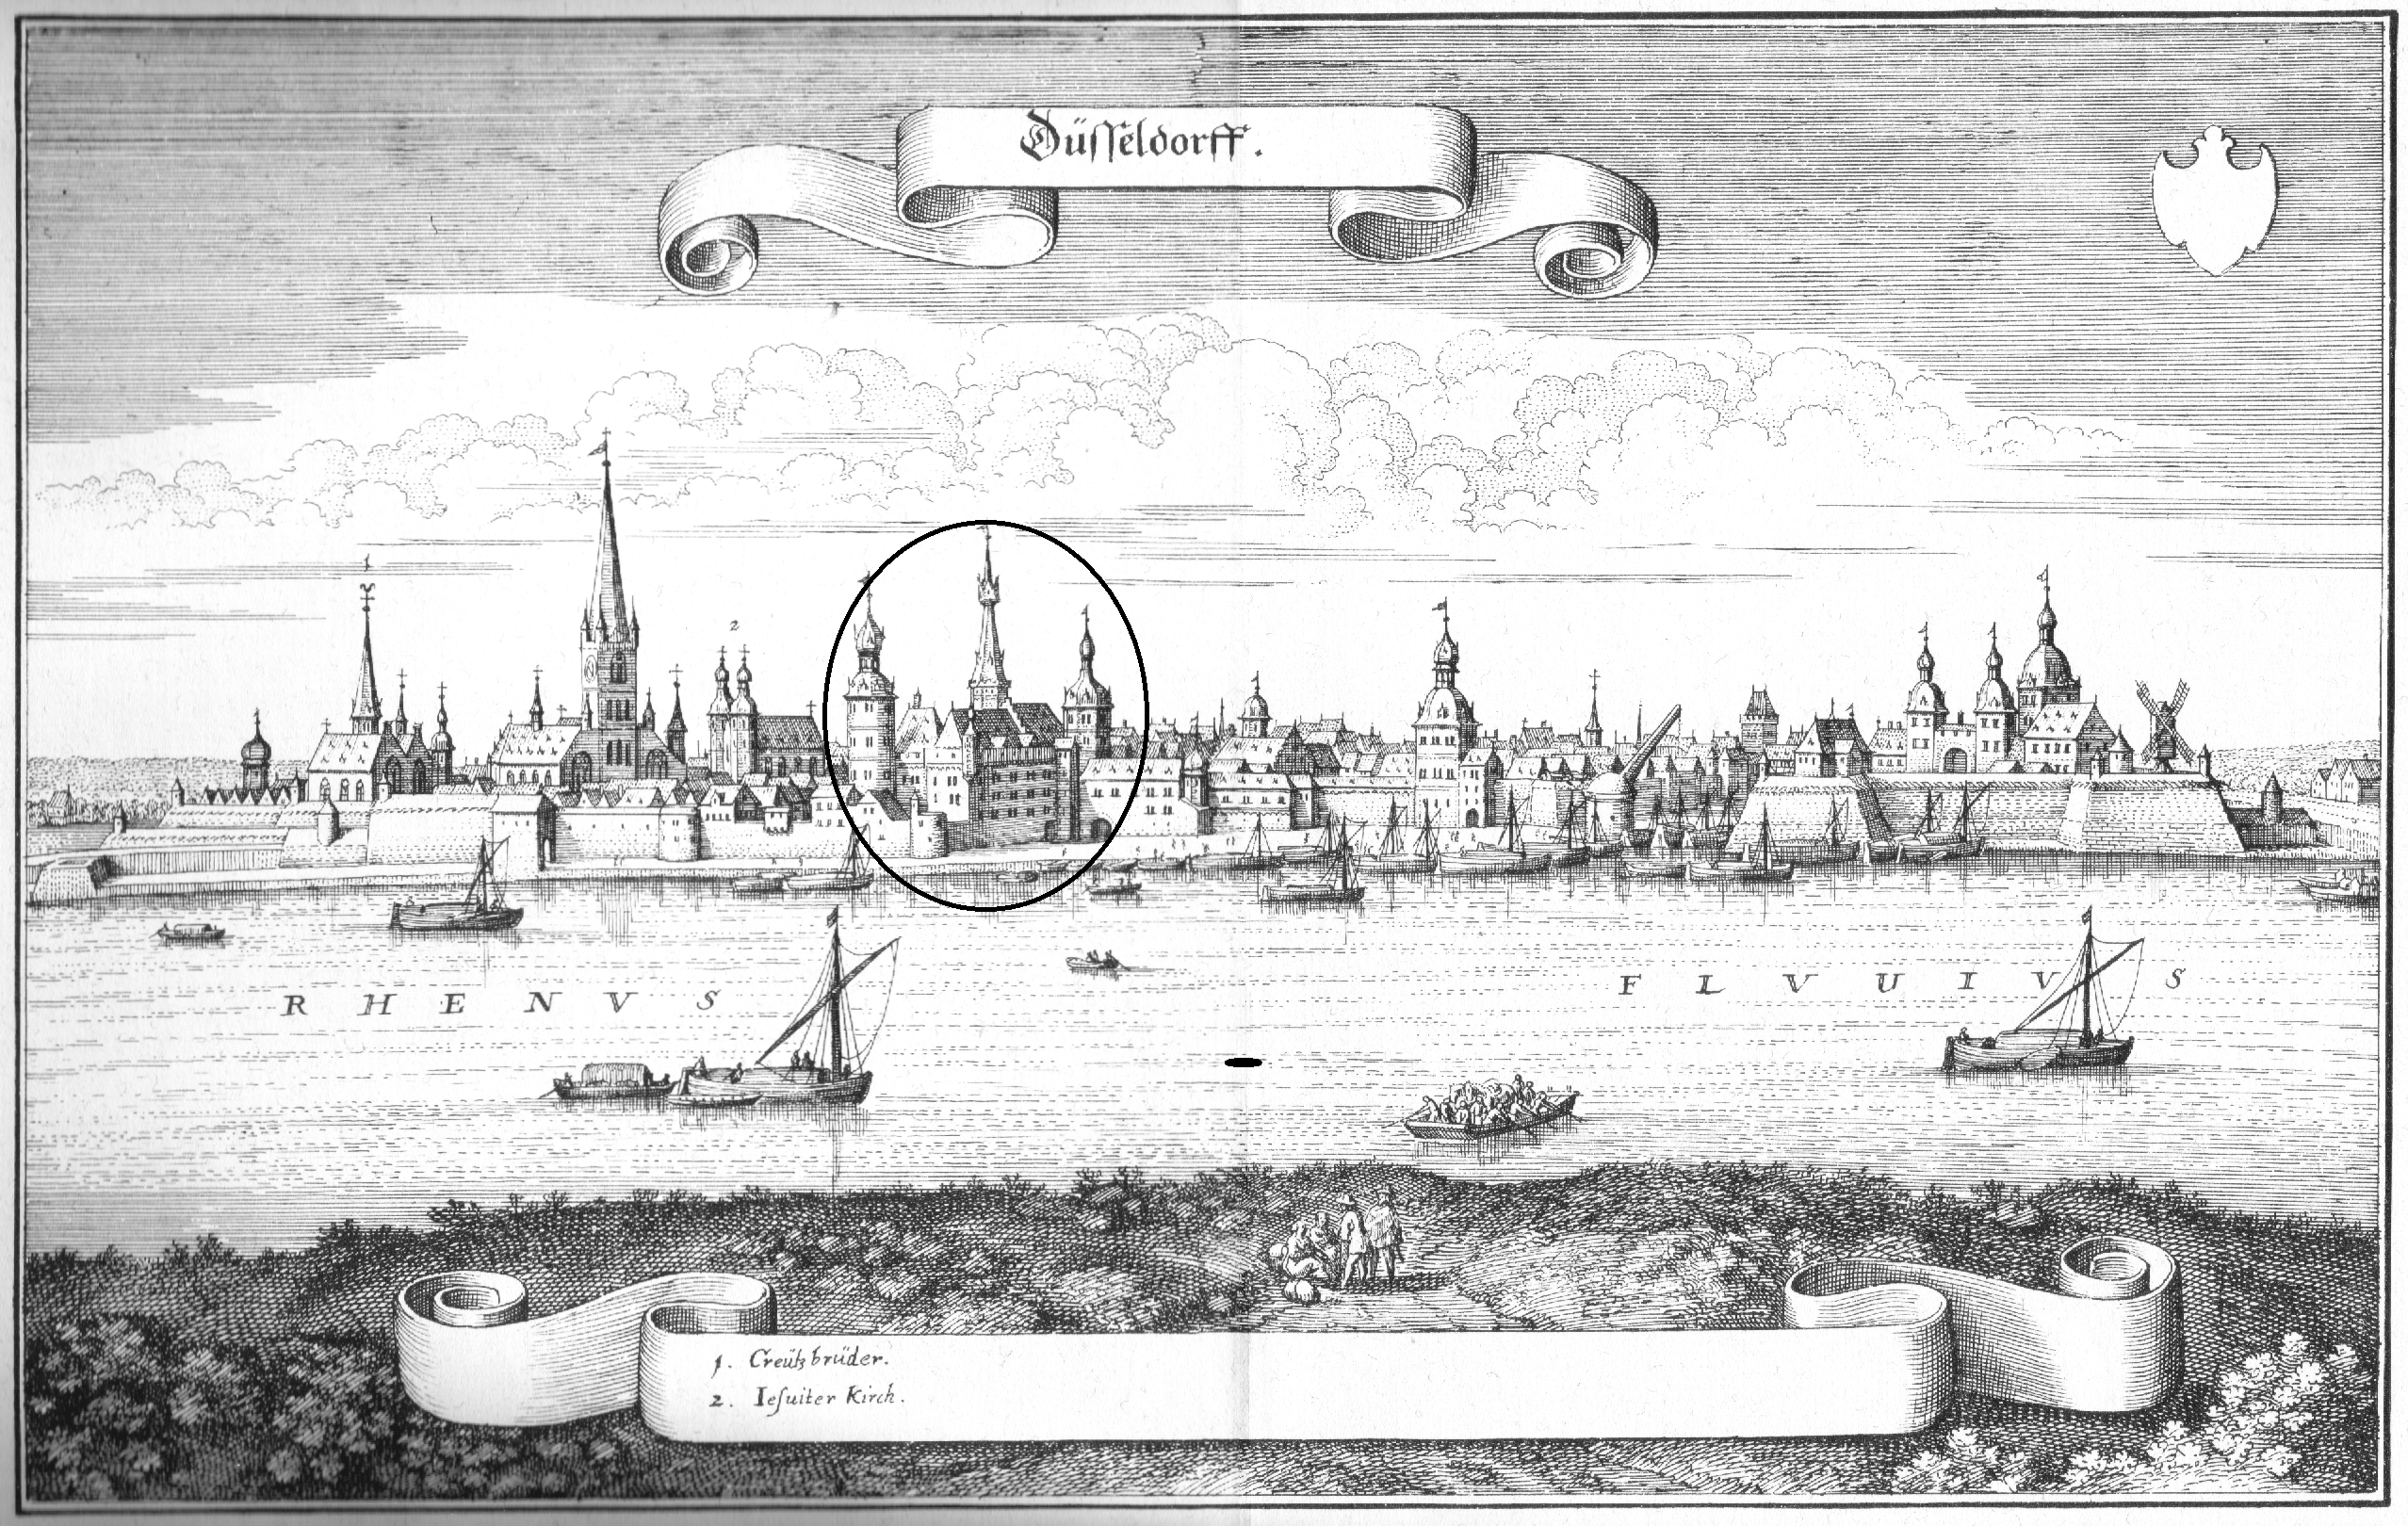 Dusseldorf, birthplace of Anne of Cleves